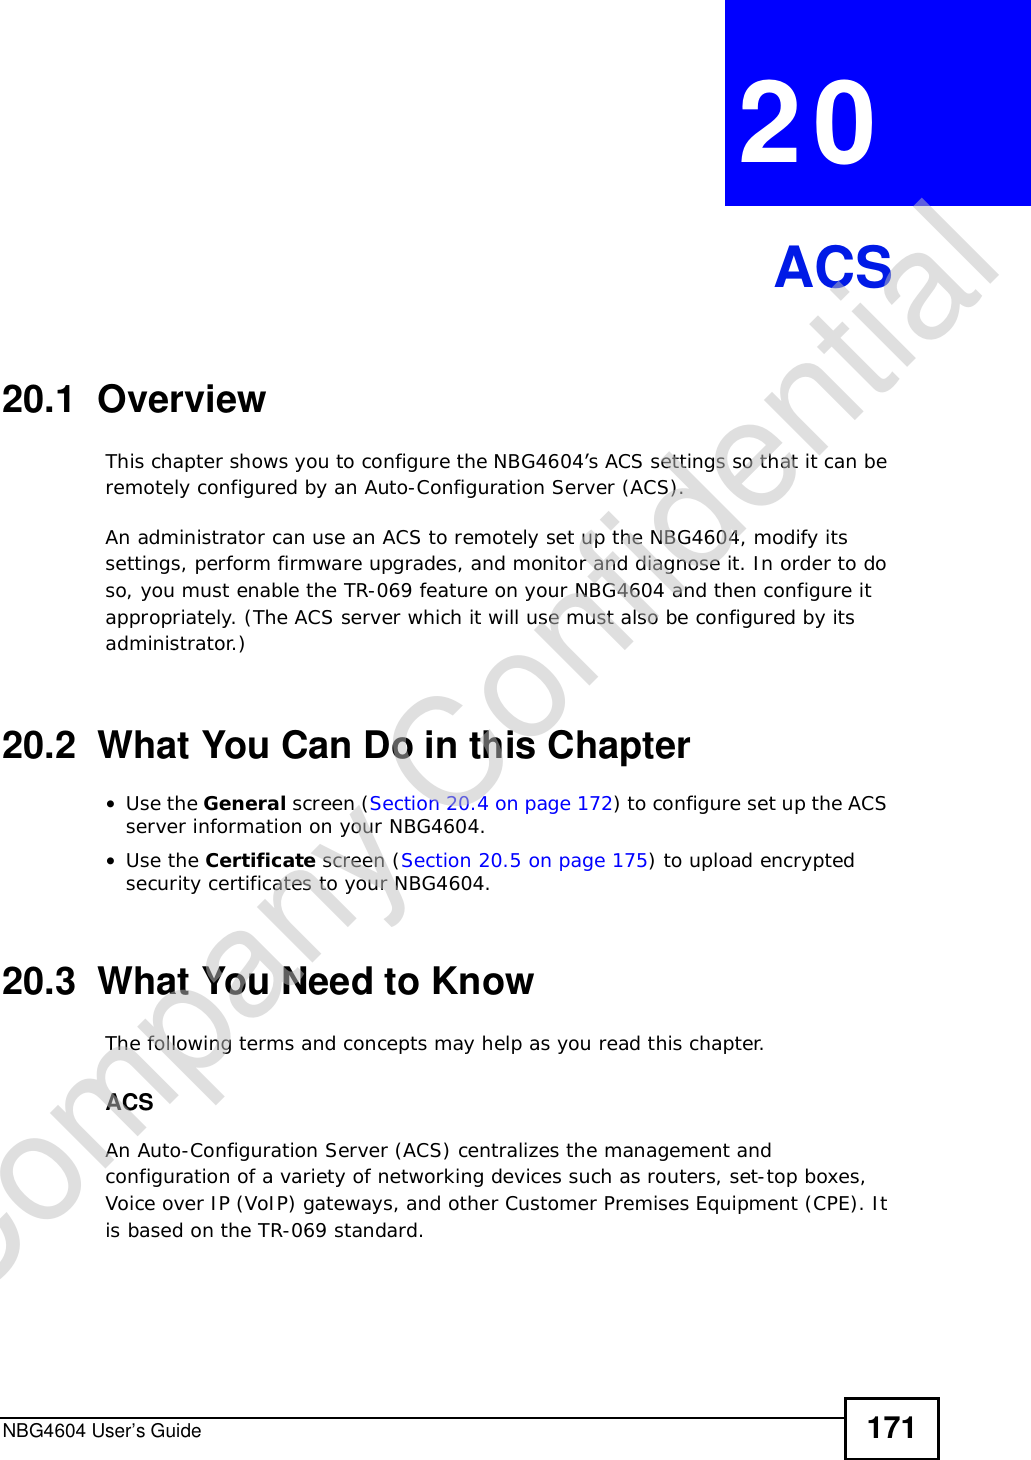 NBG4604 User’s Guide 171CHAPTER 20ACS20.1  OverviewThis chapter shows you to configure the NBG4604’s ACS settings so that it can be remotely configured by an Auto-Configuration Server (ACS).An administrator can use an ACS to remotely set up the NBG4604, modify its settings, perform firmware upgrades, and monitor and diagnose it. In order to do so, you must enable the TR-069 feature on your NBG4604 and then configure it appropriately. (The ACS server which it will use must also be configured by its administrator.)20.2  What You Can Do in this Chapter•Use the General screen (Section 20.4 on page 172) to configure set up the ACS server information on your NBG4604.•Use the Certificate screen (Section 20.5 on page 175) to upload encrypted security certificates to your NBG4604.20.3  What You Need to KnowThe following terms and concepts may help as you read this chapter.ACSAn Auto-Configuration Server (ACS) centralizes the management and configuration of a variety of networking devices such as routers, set-top boxes, Voice over IP (VoIP) gateways, and other Customer Premises Equipment (CPE). It is based on the TR-069 standard.Company Confidential